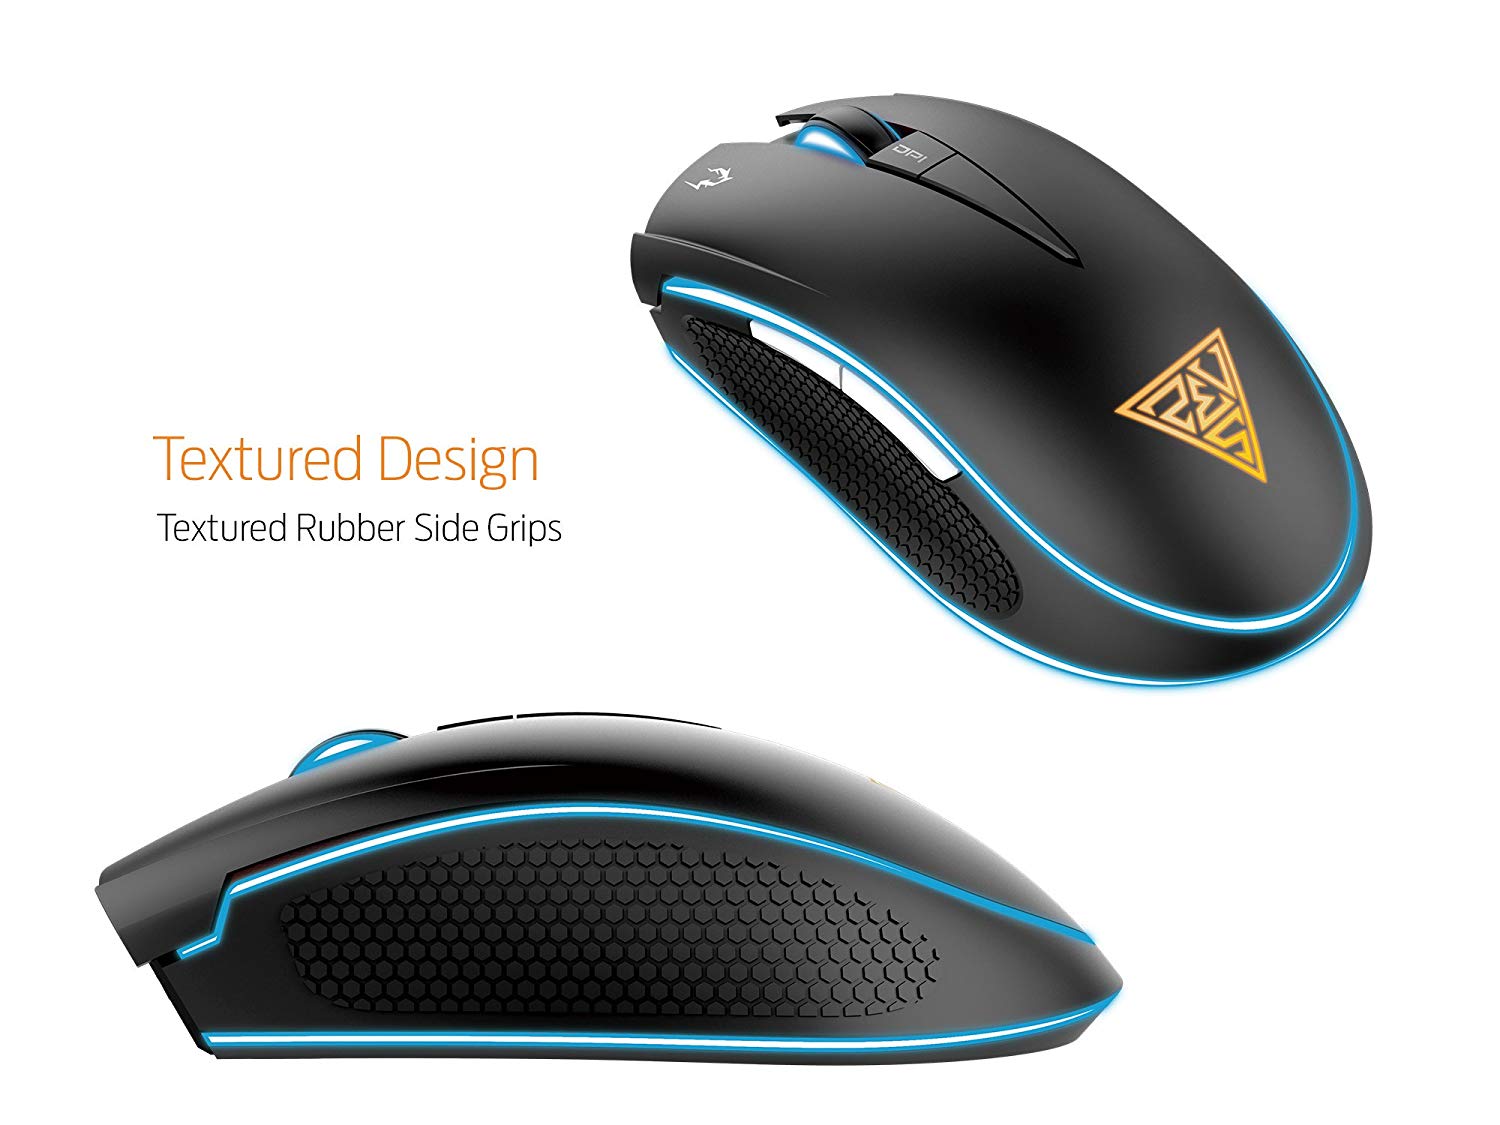 GAMDIAS Optical Gaming Mouse with 6 Smart Buttons, Double Level Multi-Color Lighting and Gaming Mouse Mat (ZEUS E1)